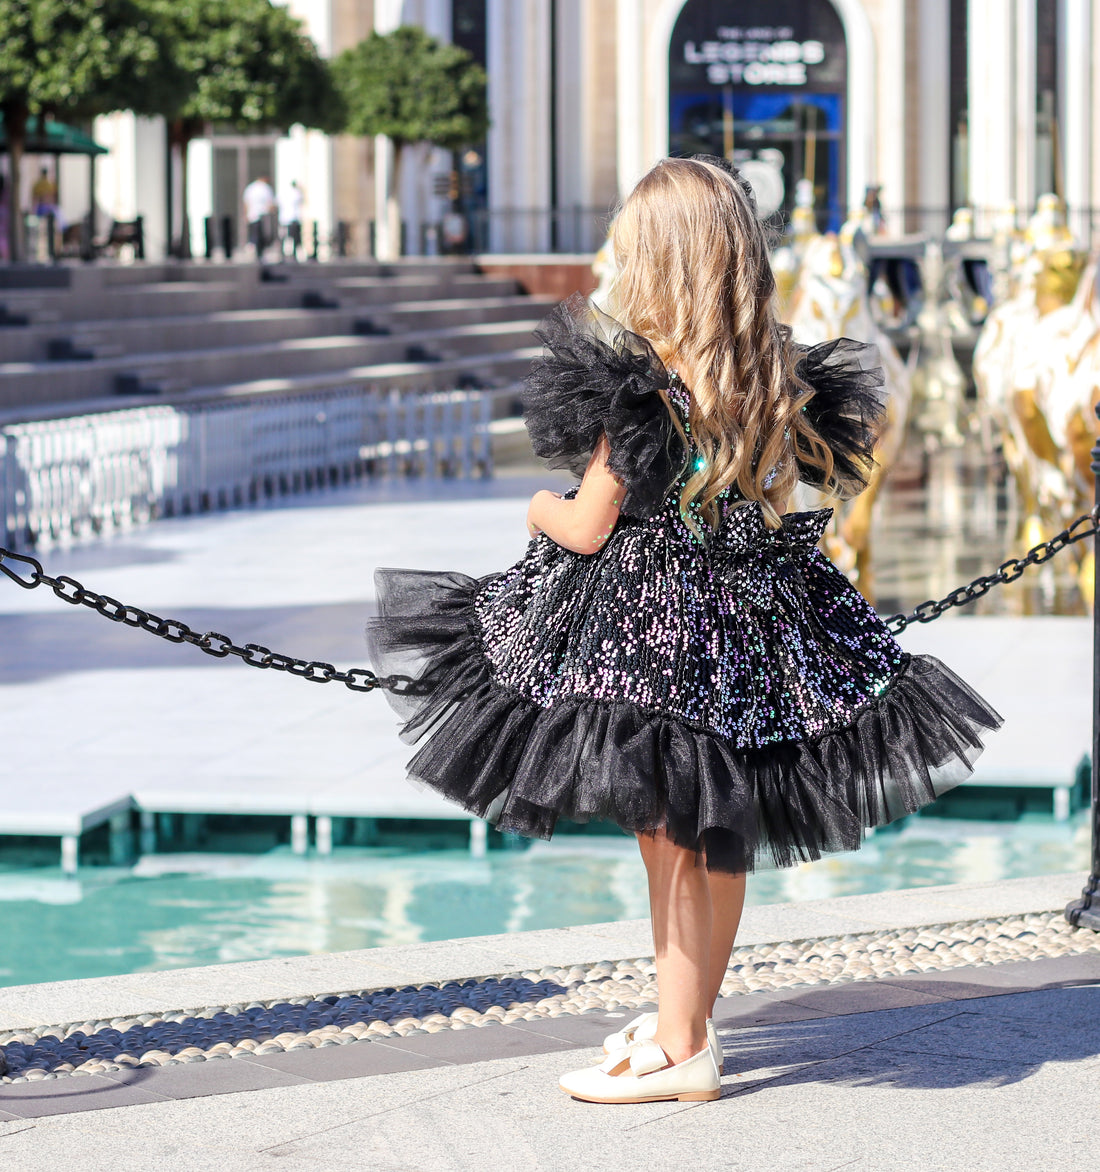 Where to use luxury girl dresses